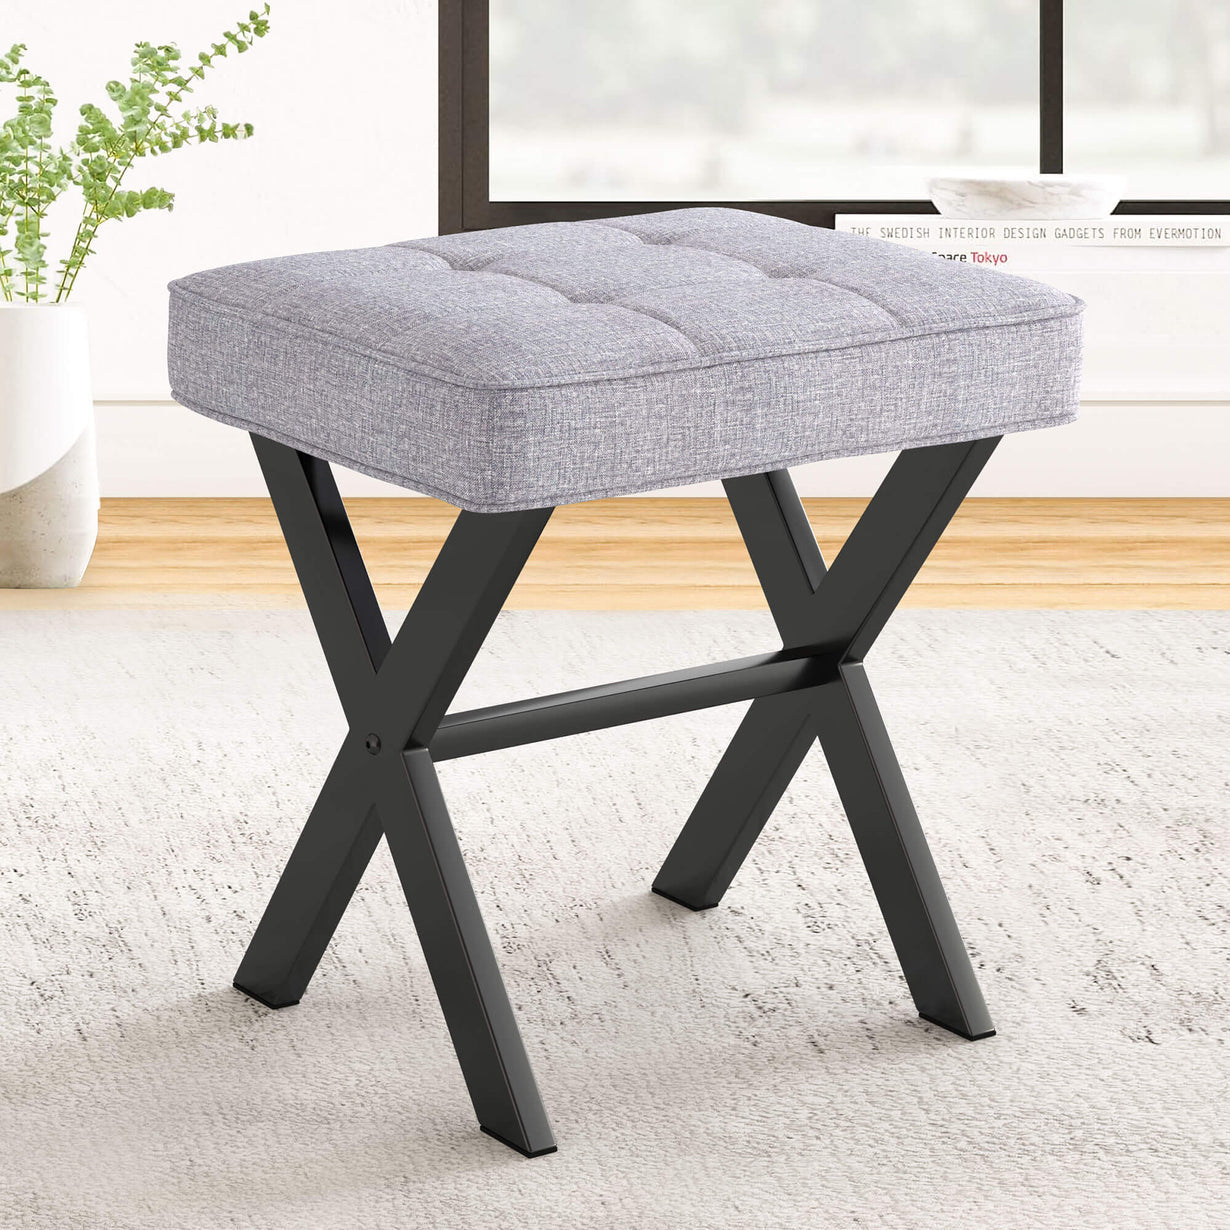 Vanity Stool, Square Linen Makeup Stool with Metal X Legs, Small Ottoman Stool Chair for Vanity, Modern Padded Vanity Seat Foot Rest Stool for Makeup Room, Living Room, Bathroom, Dark Gray